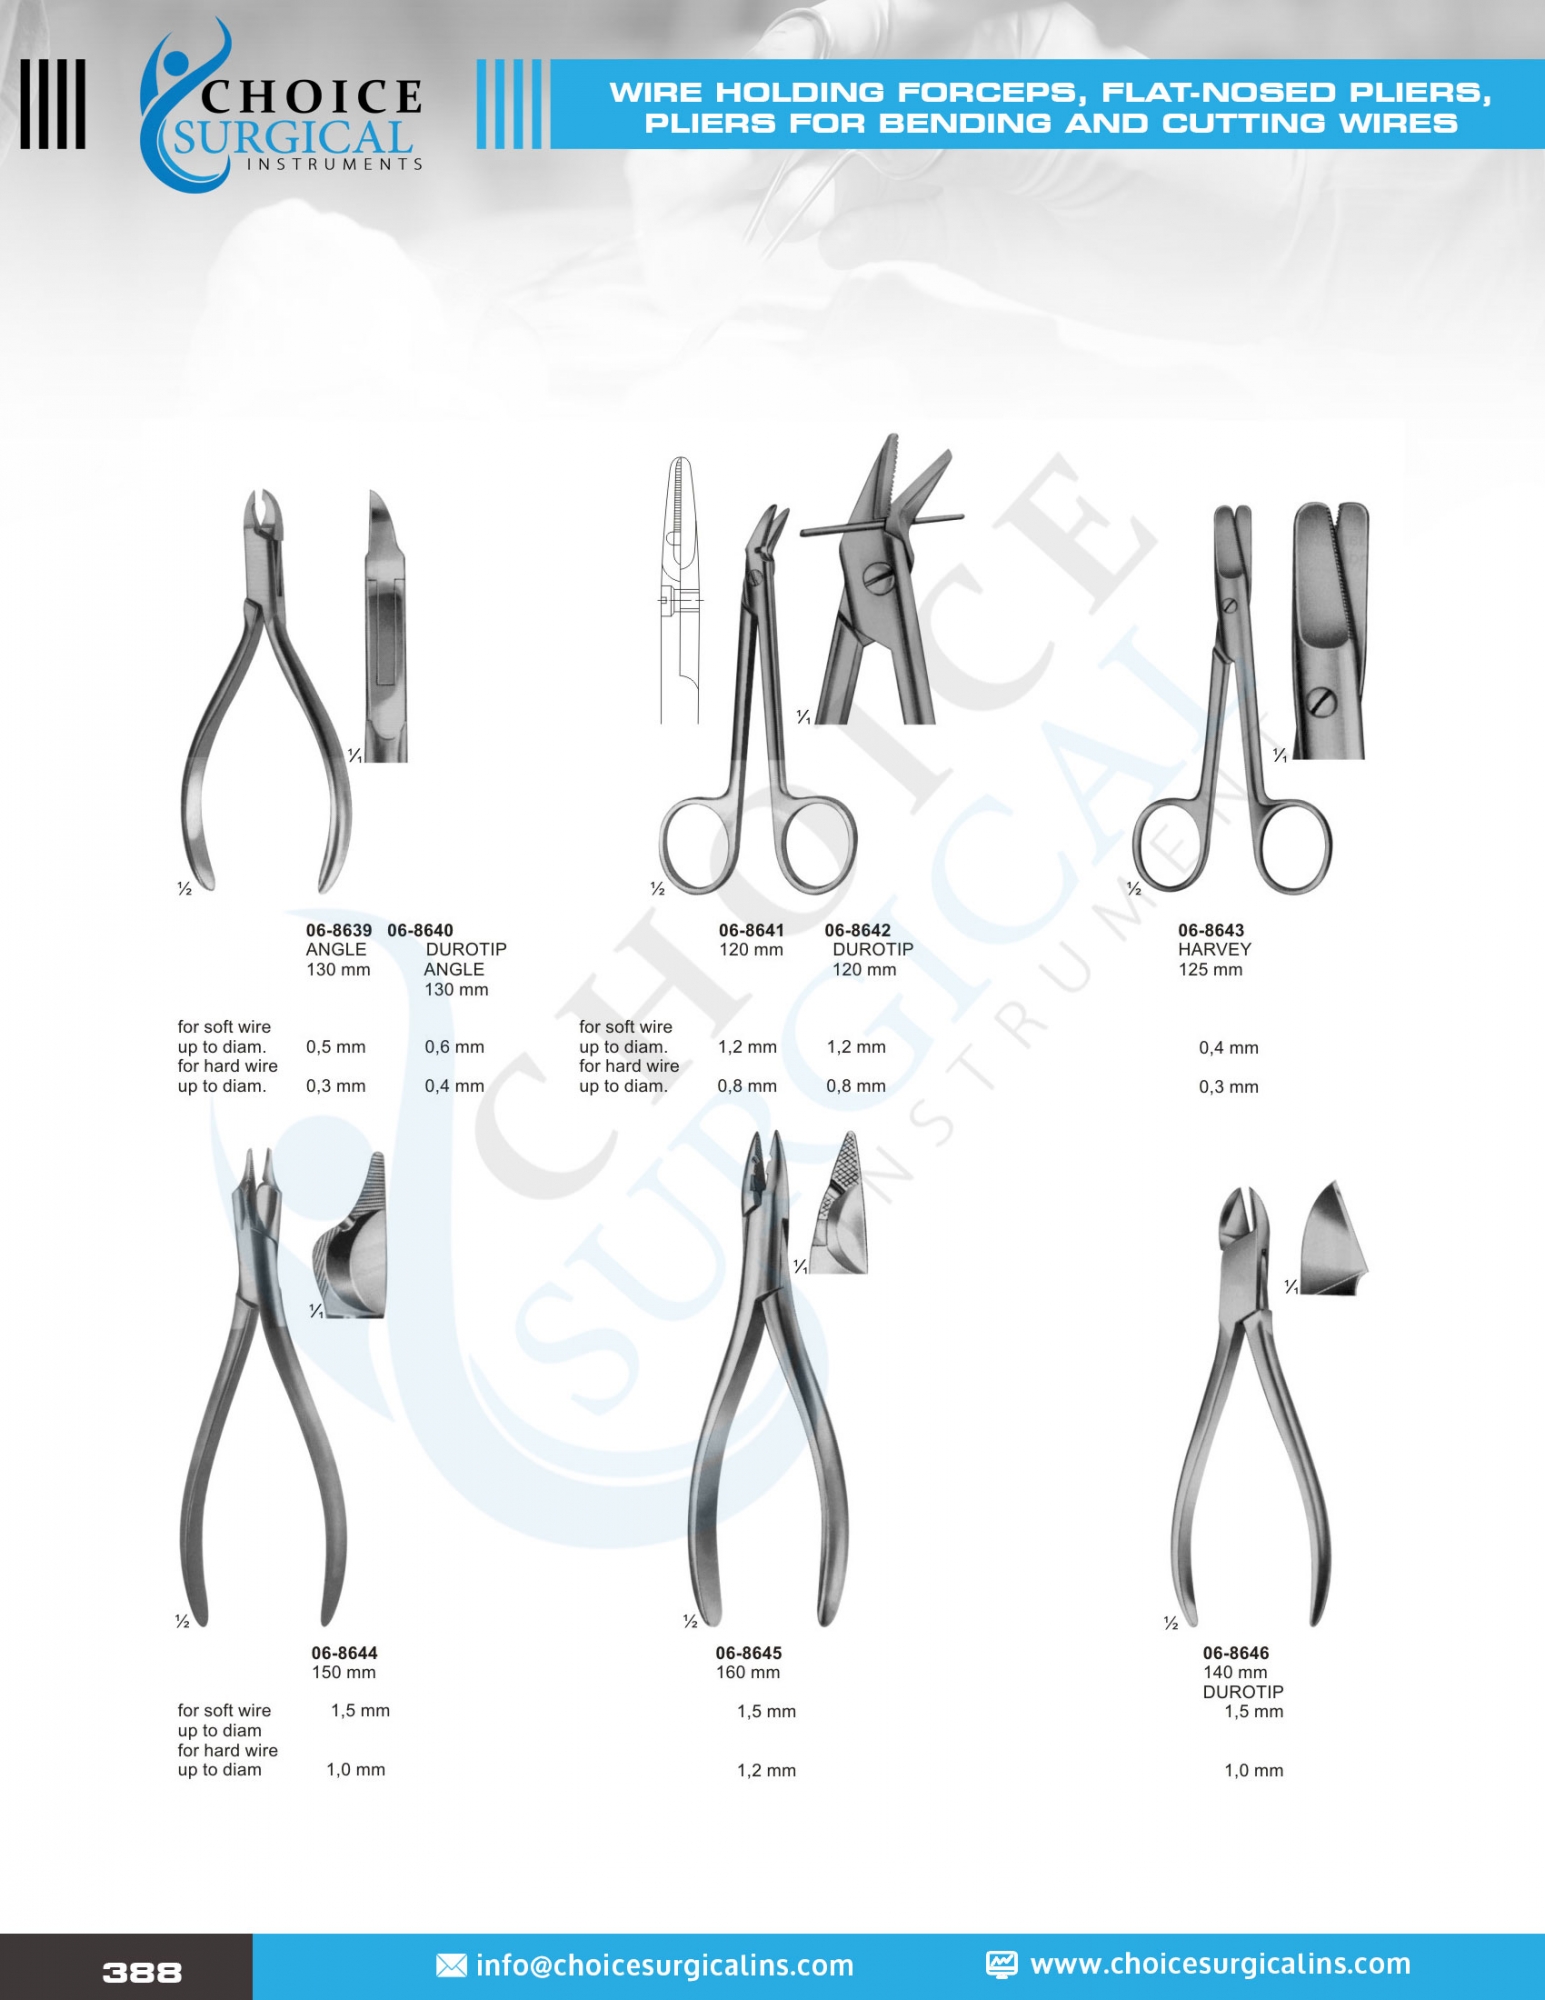 Wire Extension, Finger Nail Instruments